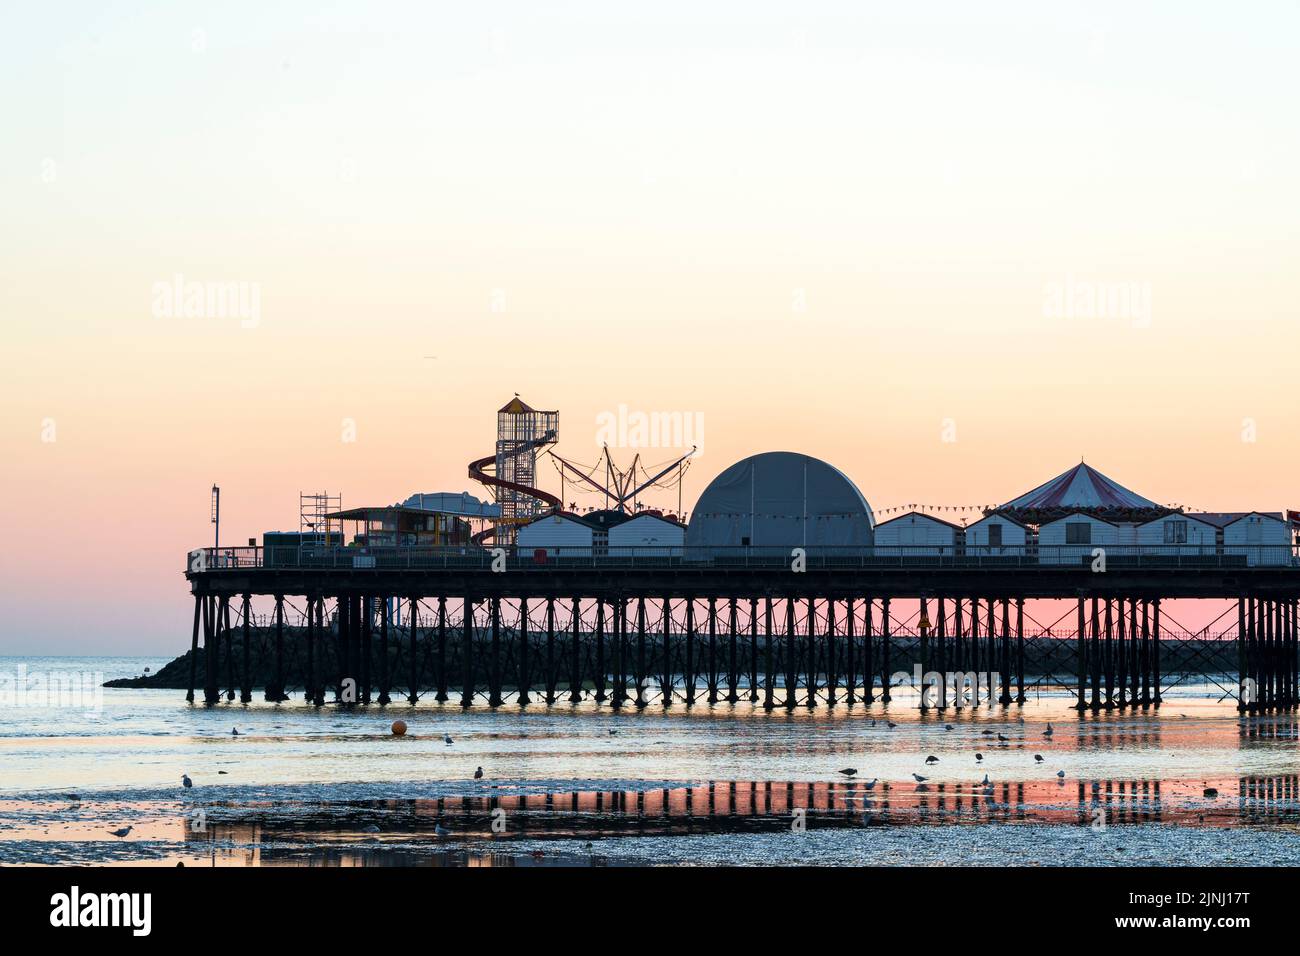 The beach and the pier at low tide during first light of the pastel-coloured dawn sky at the Kent resort town of Herne Bay. Stock Photo